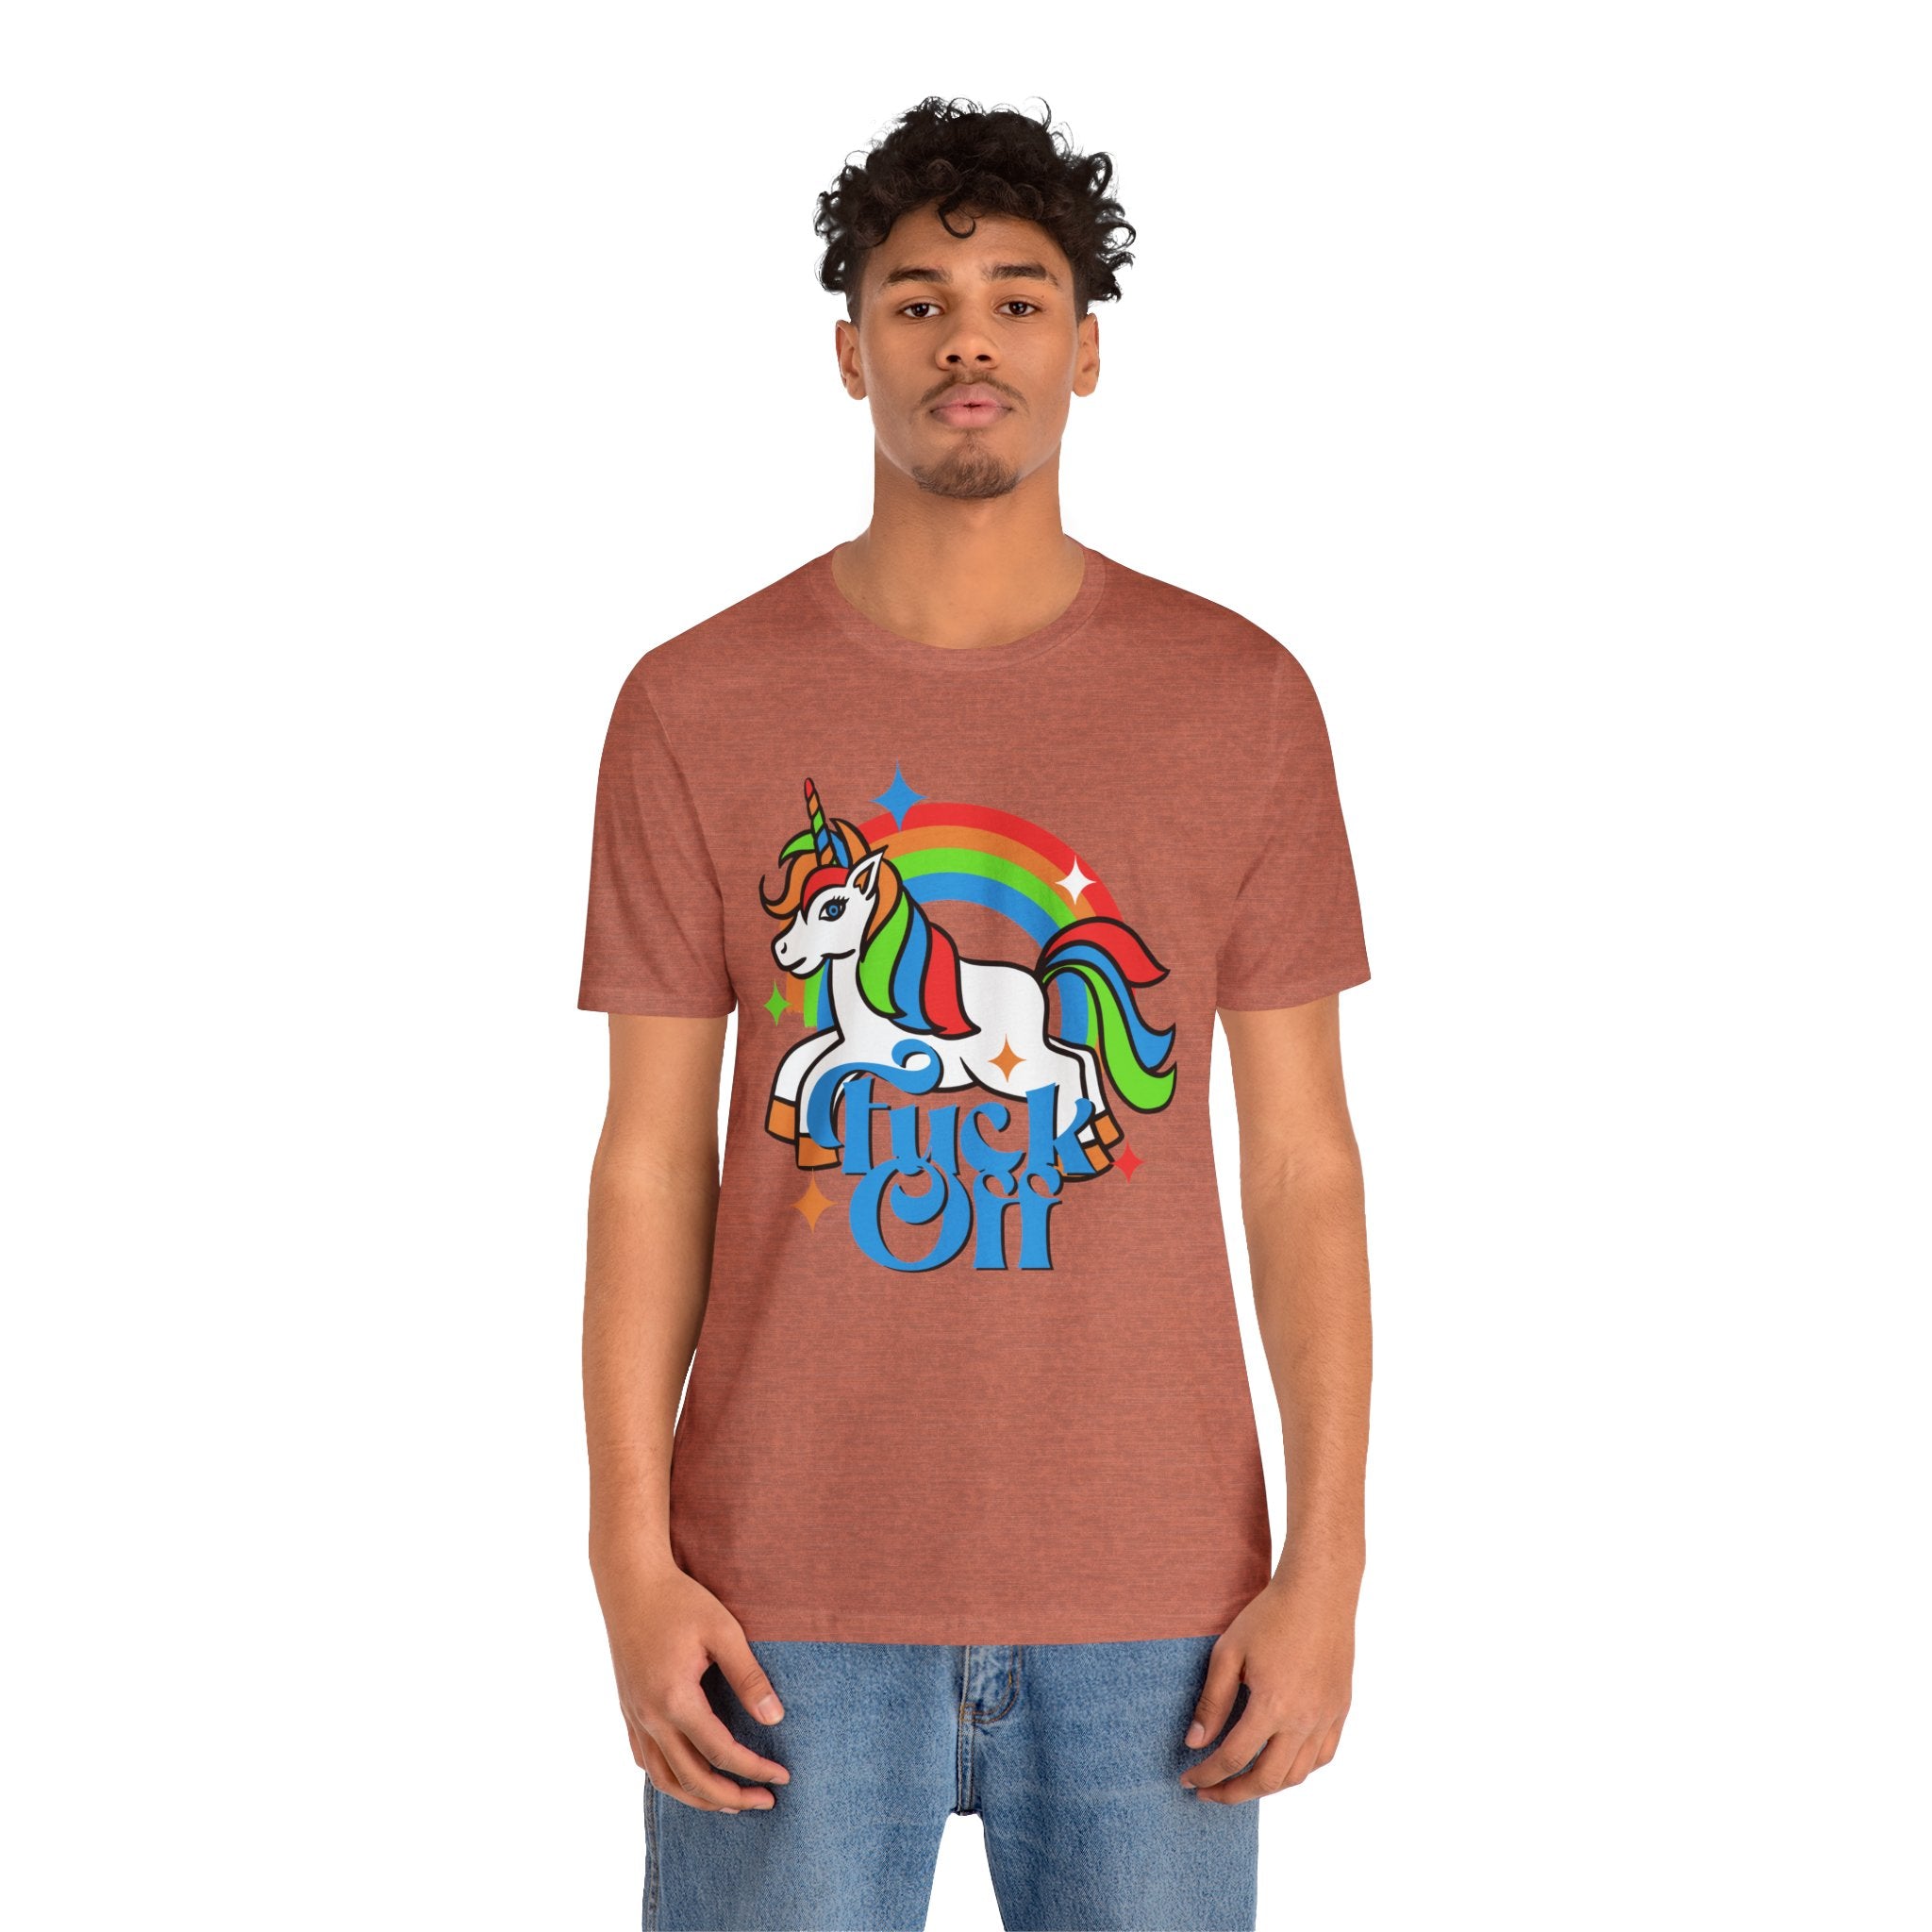 Young man in a brown, cotton unisex F off T-shirt featuring a colorful unicorn and rainbow design with the quality print and the text "dream on.